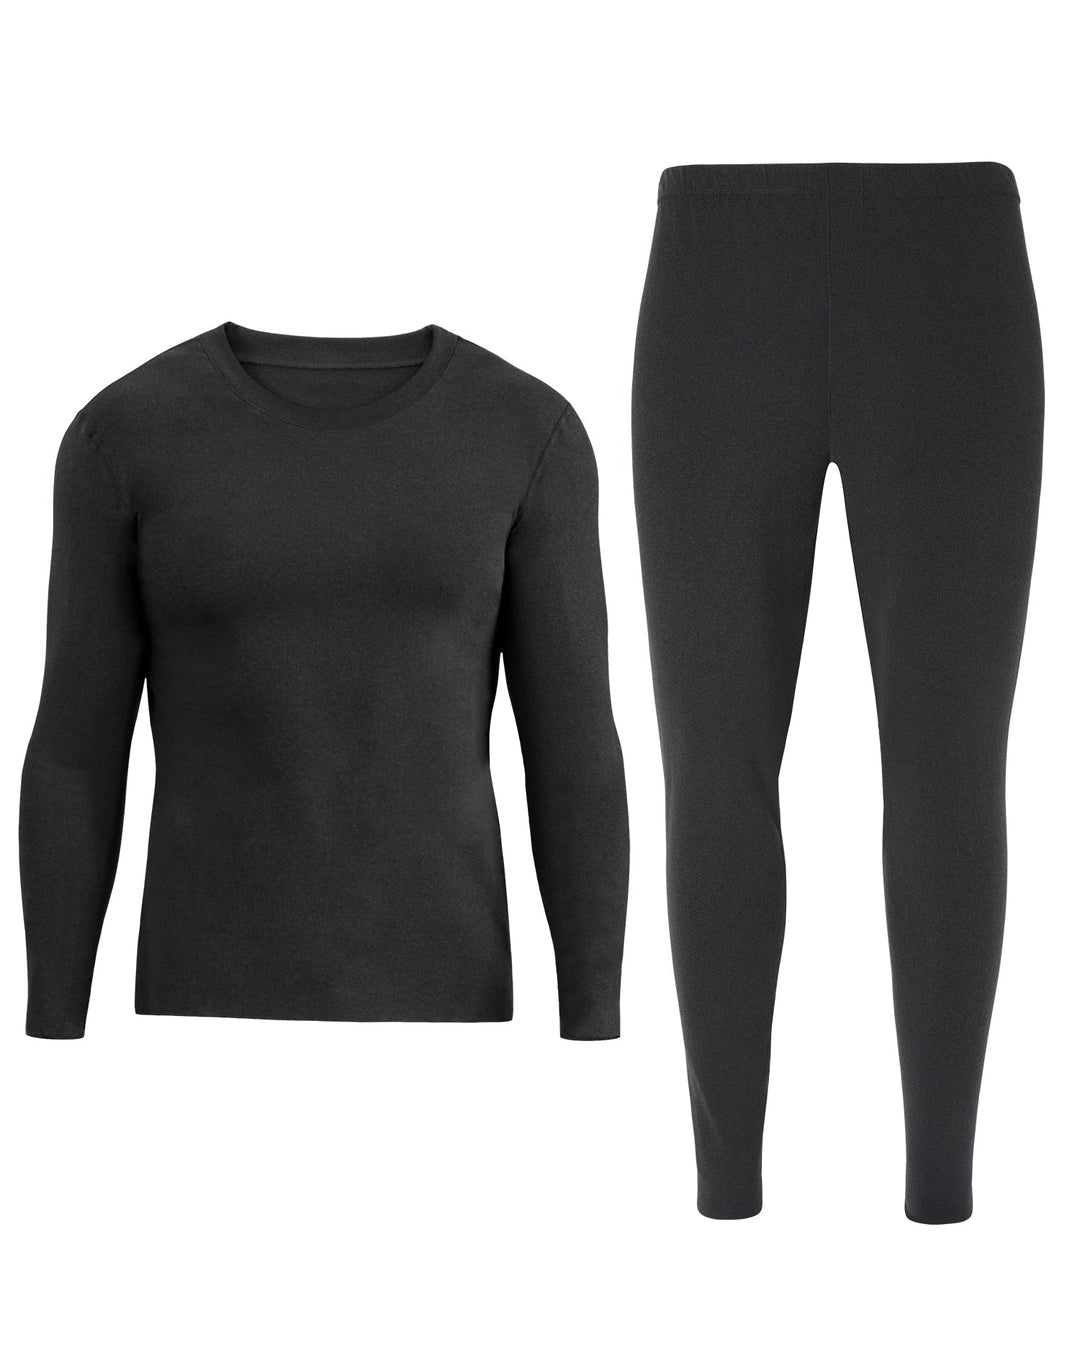 Breathable Womens Thermal Long Johns Set For Winter Seamless Full